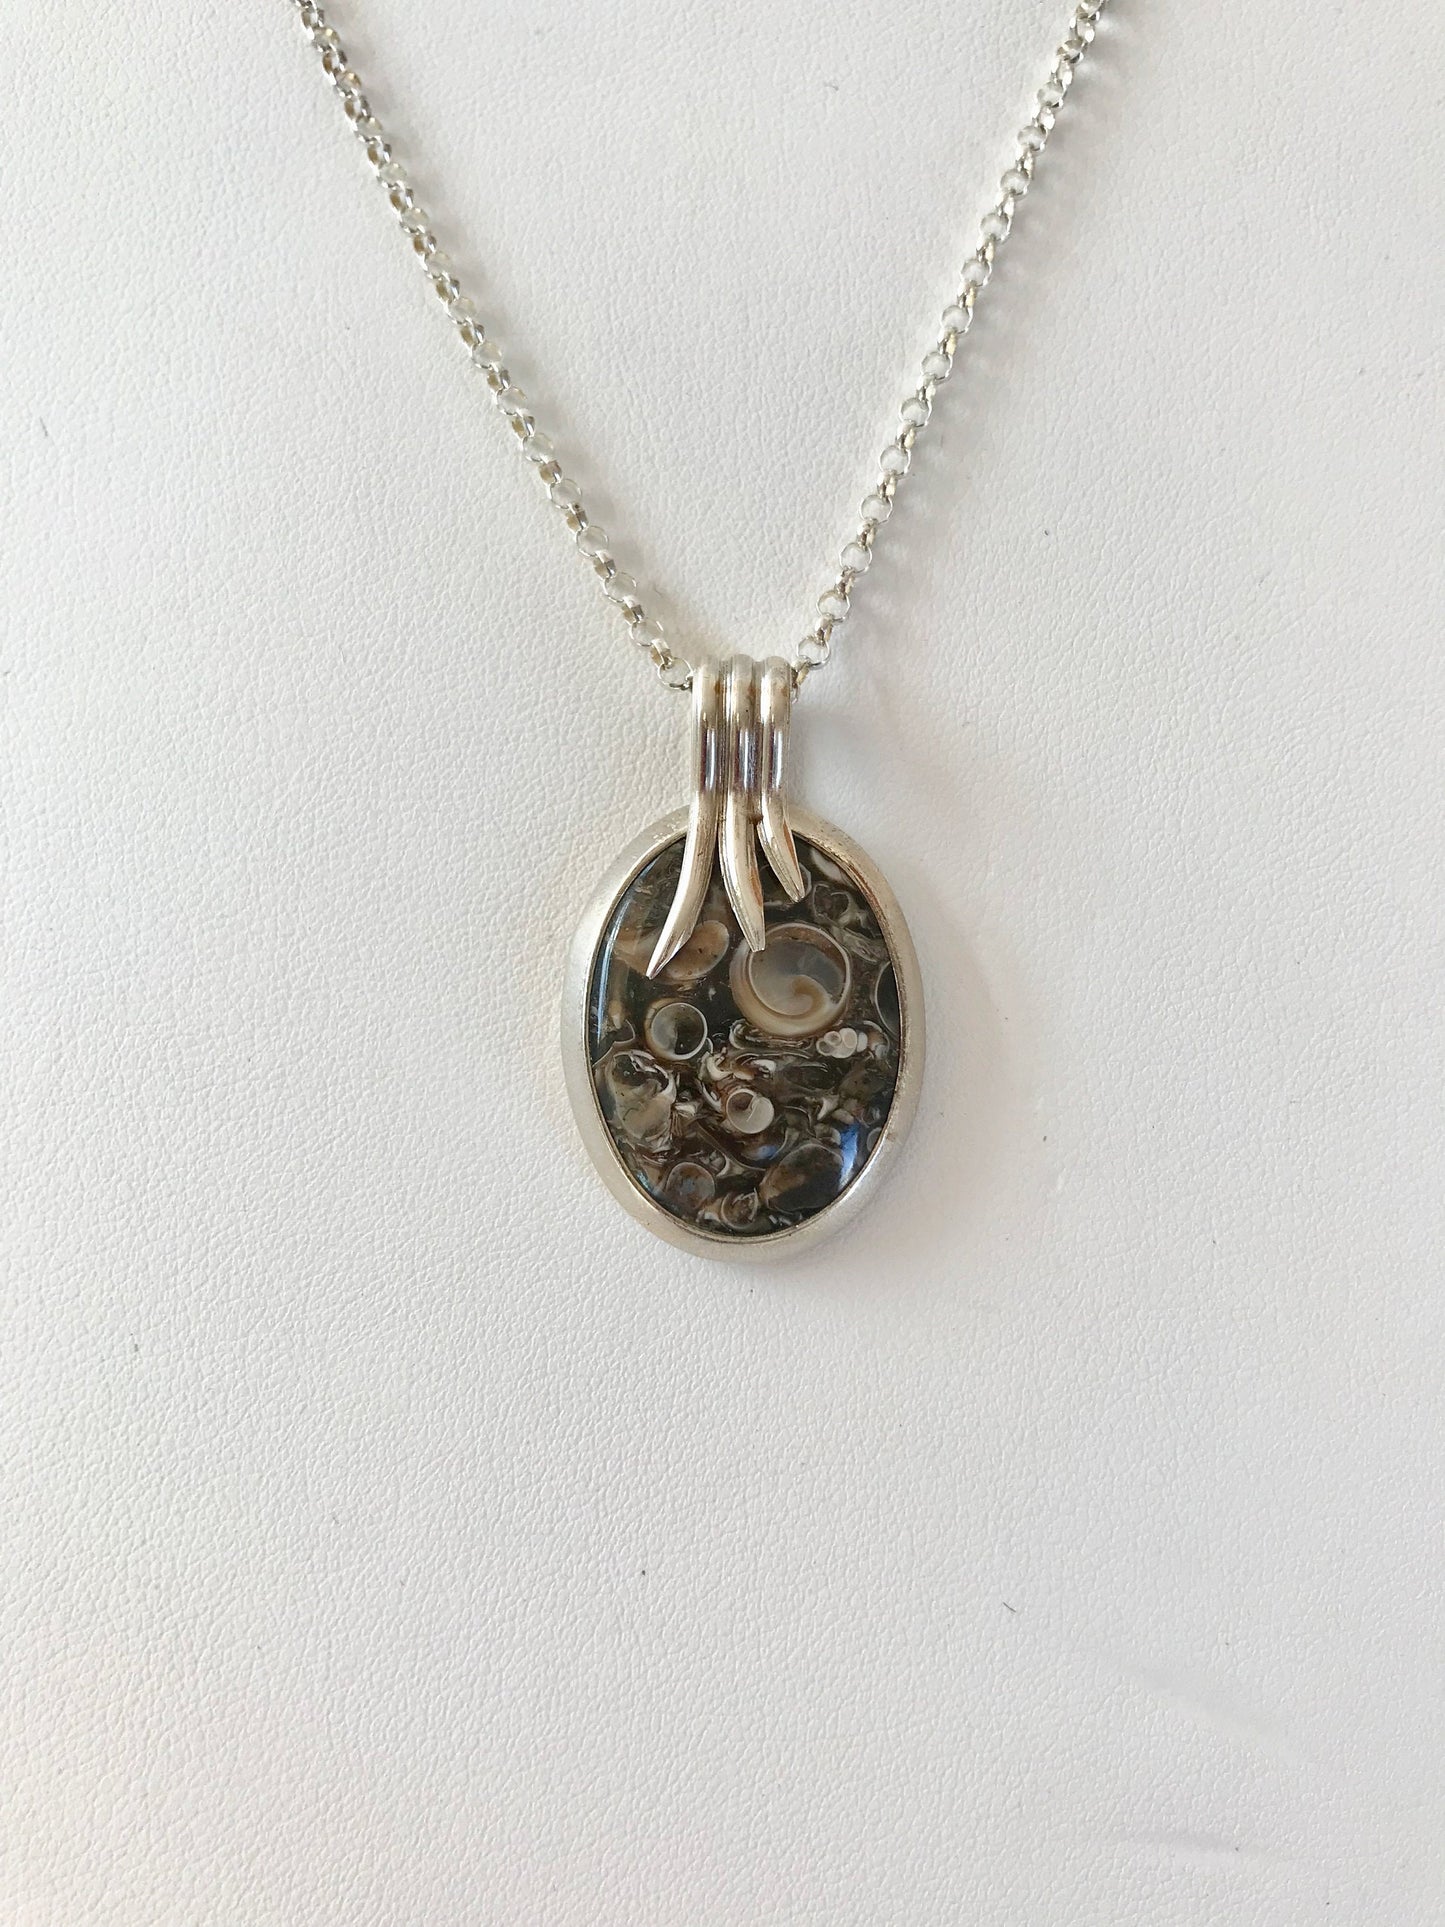 Beautiful Turritella Agate stone strung on a quality sterling silver chain. Gift for women, birthday gift, gift for anything!